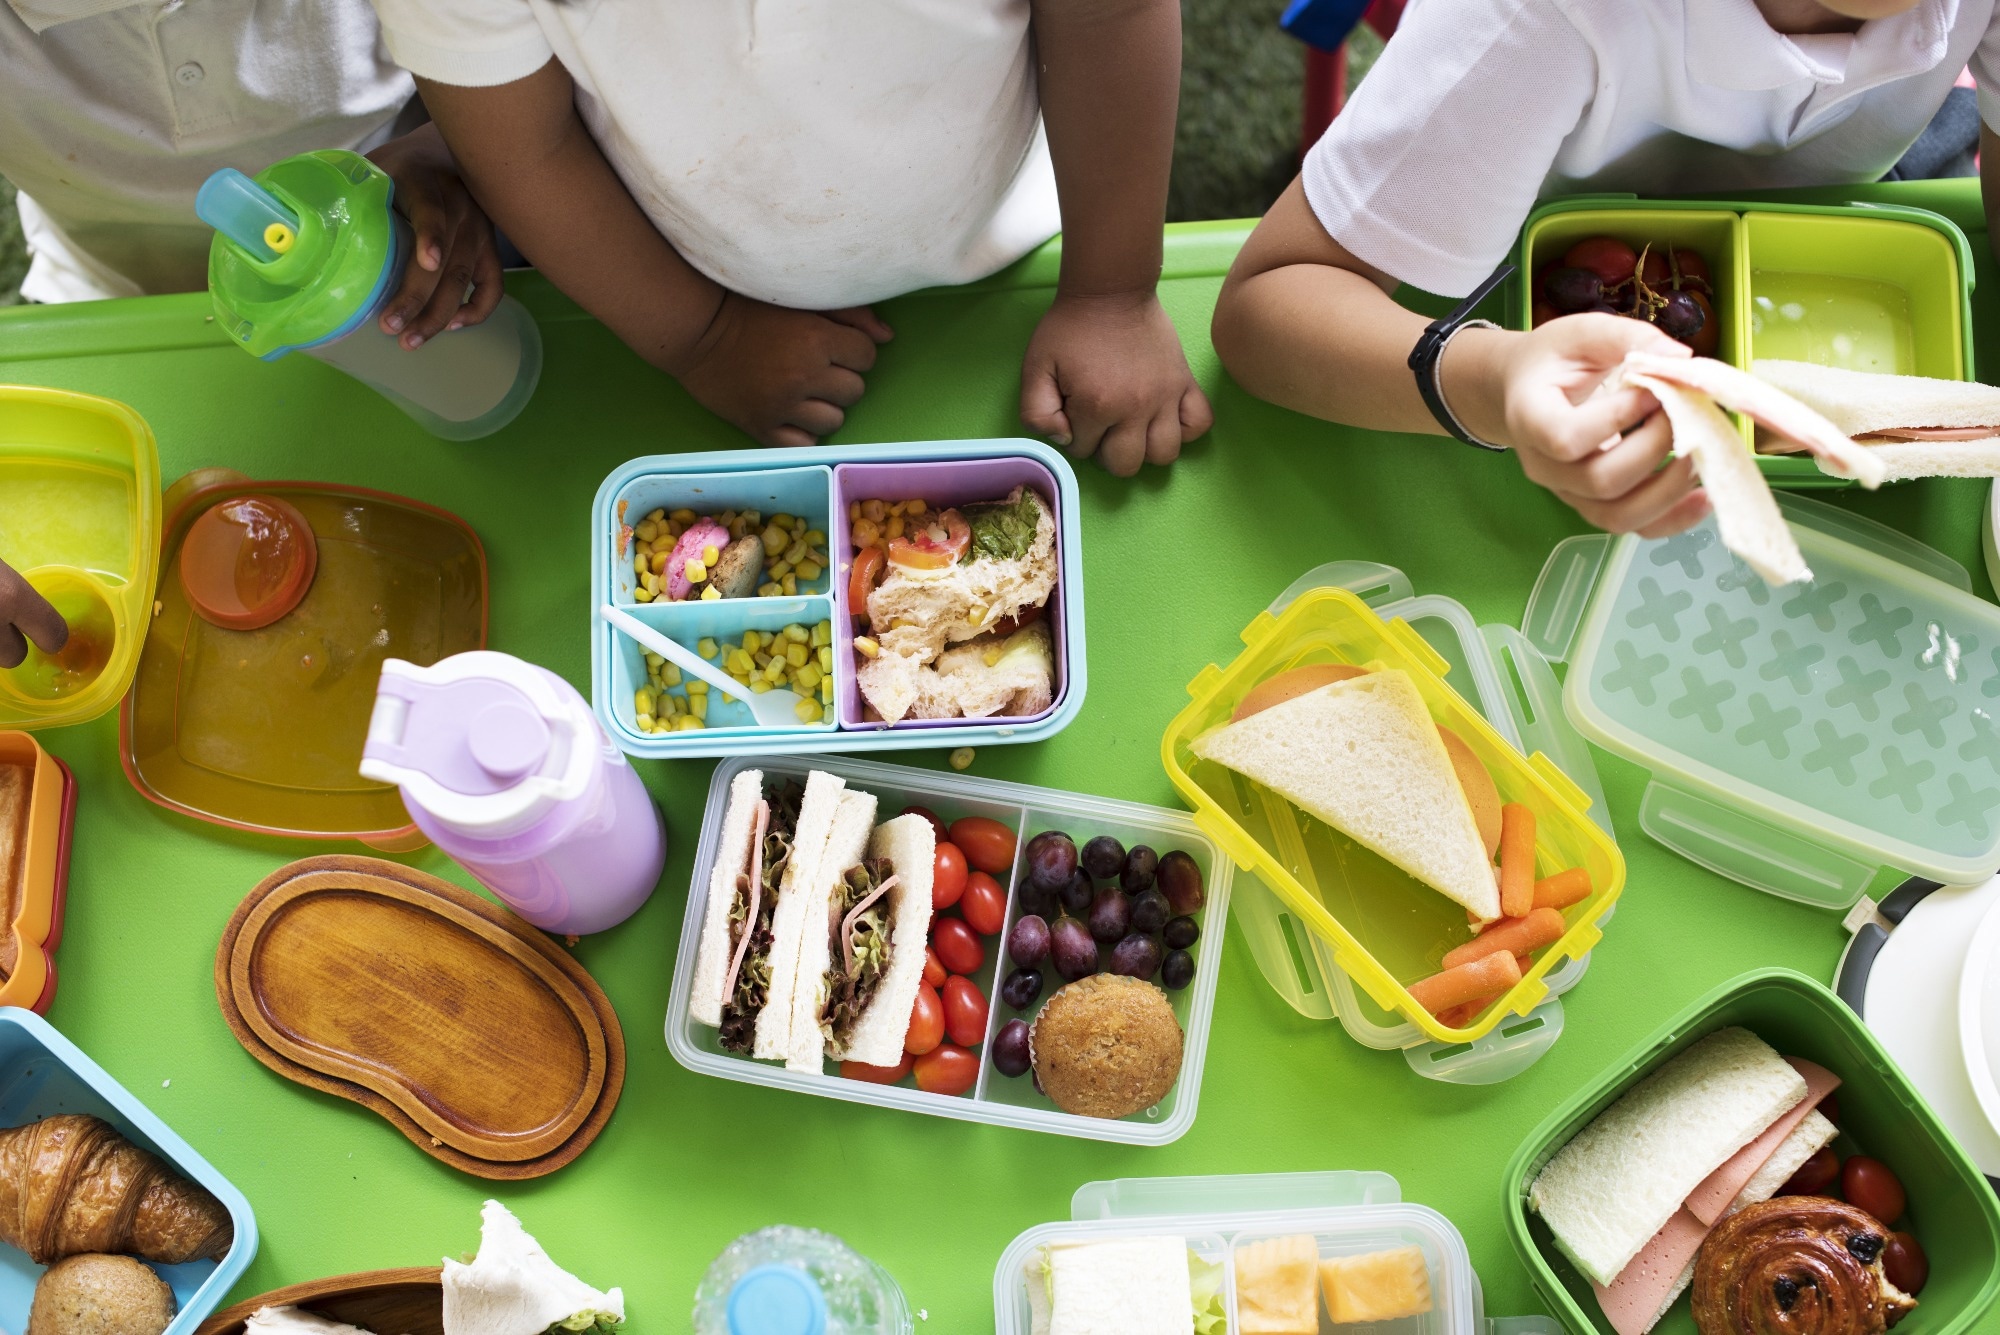 Study: Can Kindergarten Meals Improve the Daily Intake of Vegetables, Whole Grains, and Nuts among Preschool Children? A Randomized Controlled Evaluation. Image Credit: Rawpixel.com / Shutterstock